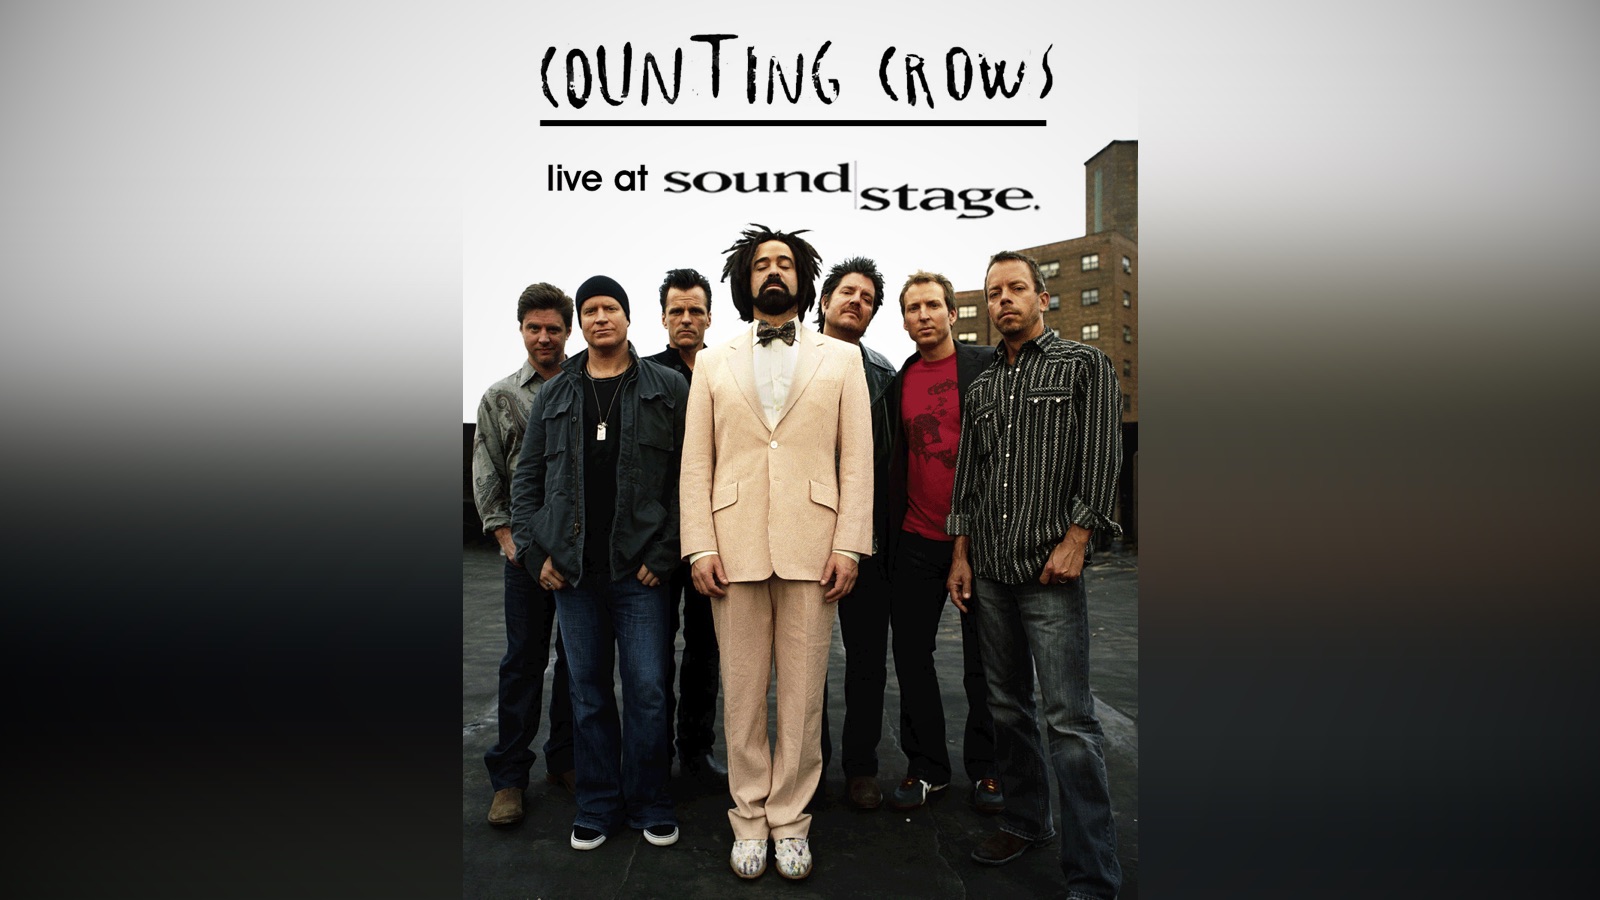 Counting Crows Live at Soundstage on Apple TV